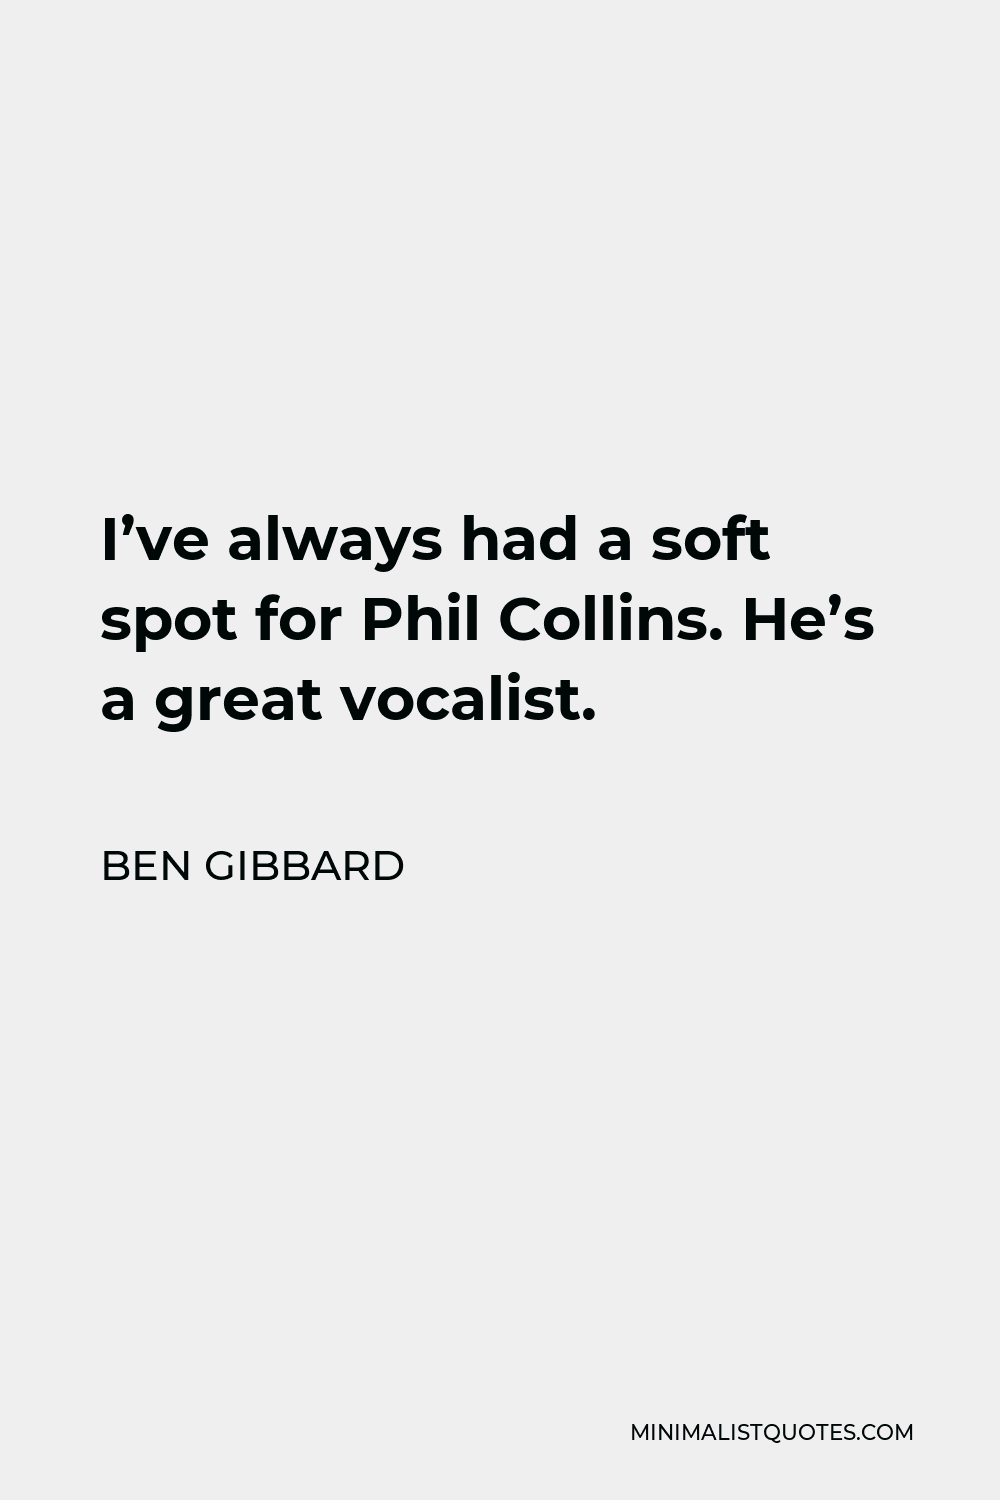 Ben Gibbard Quote - I’ve always had a soft spot for Phil Collins. He’s a great vocalist.